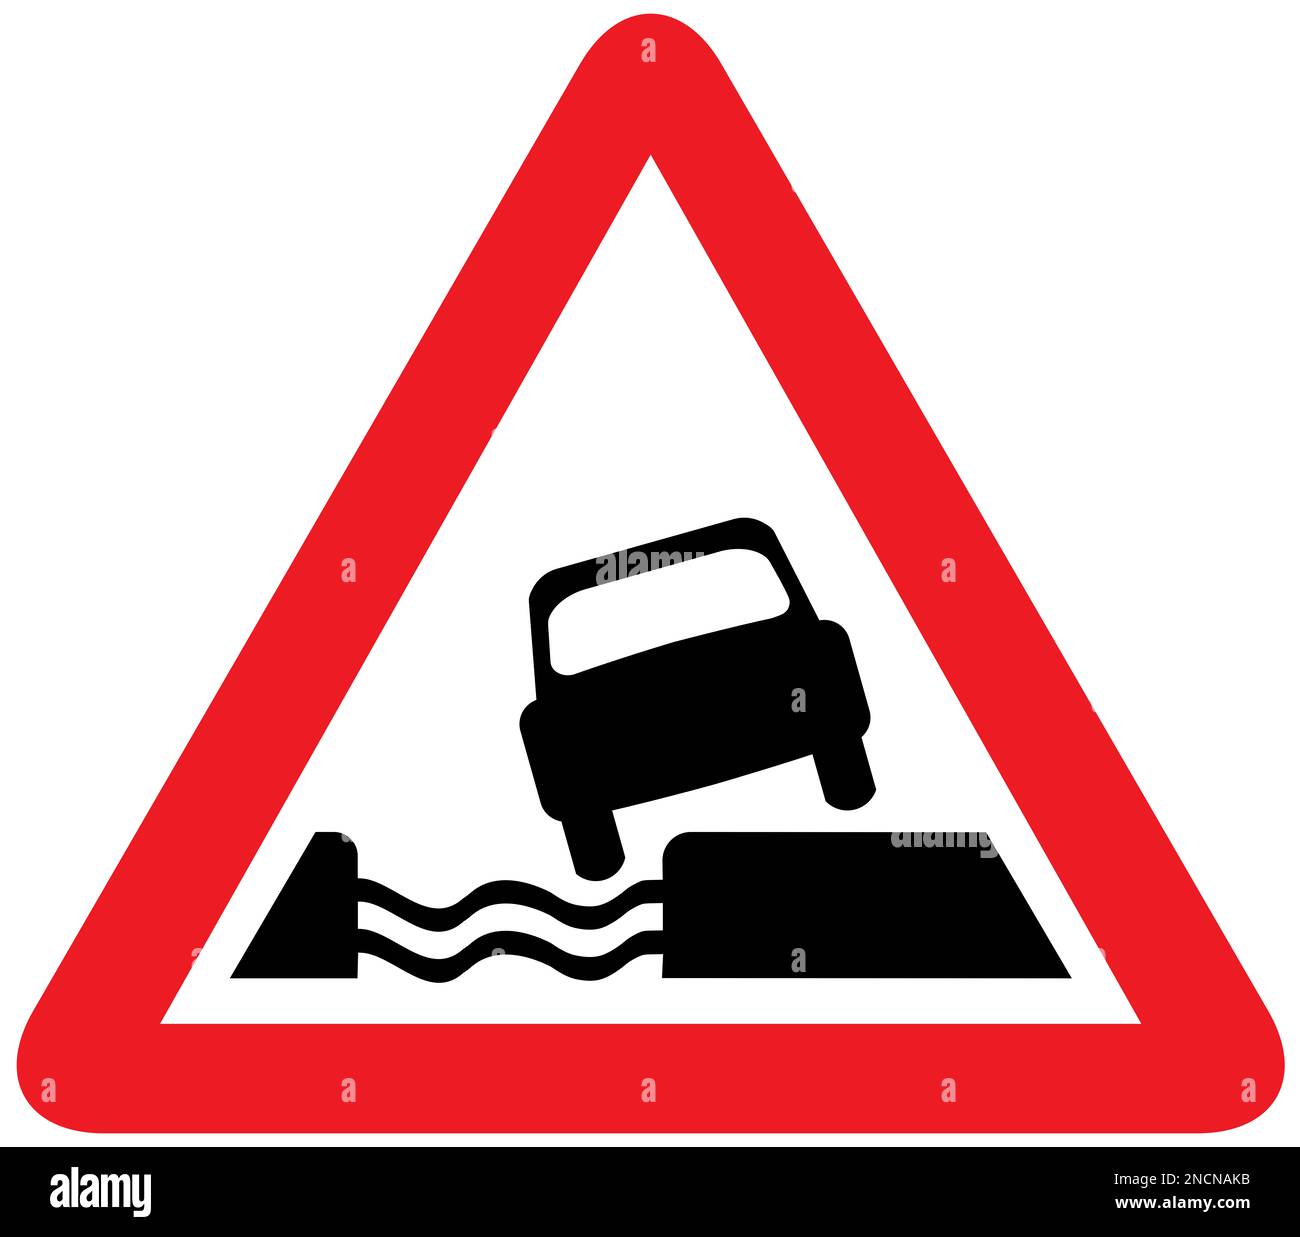 Water course alongside road ahead British road sign Stock Photo